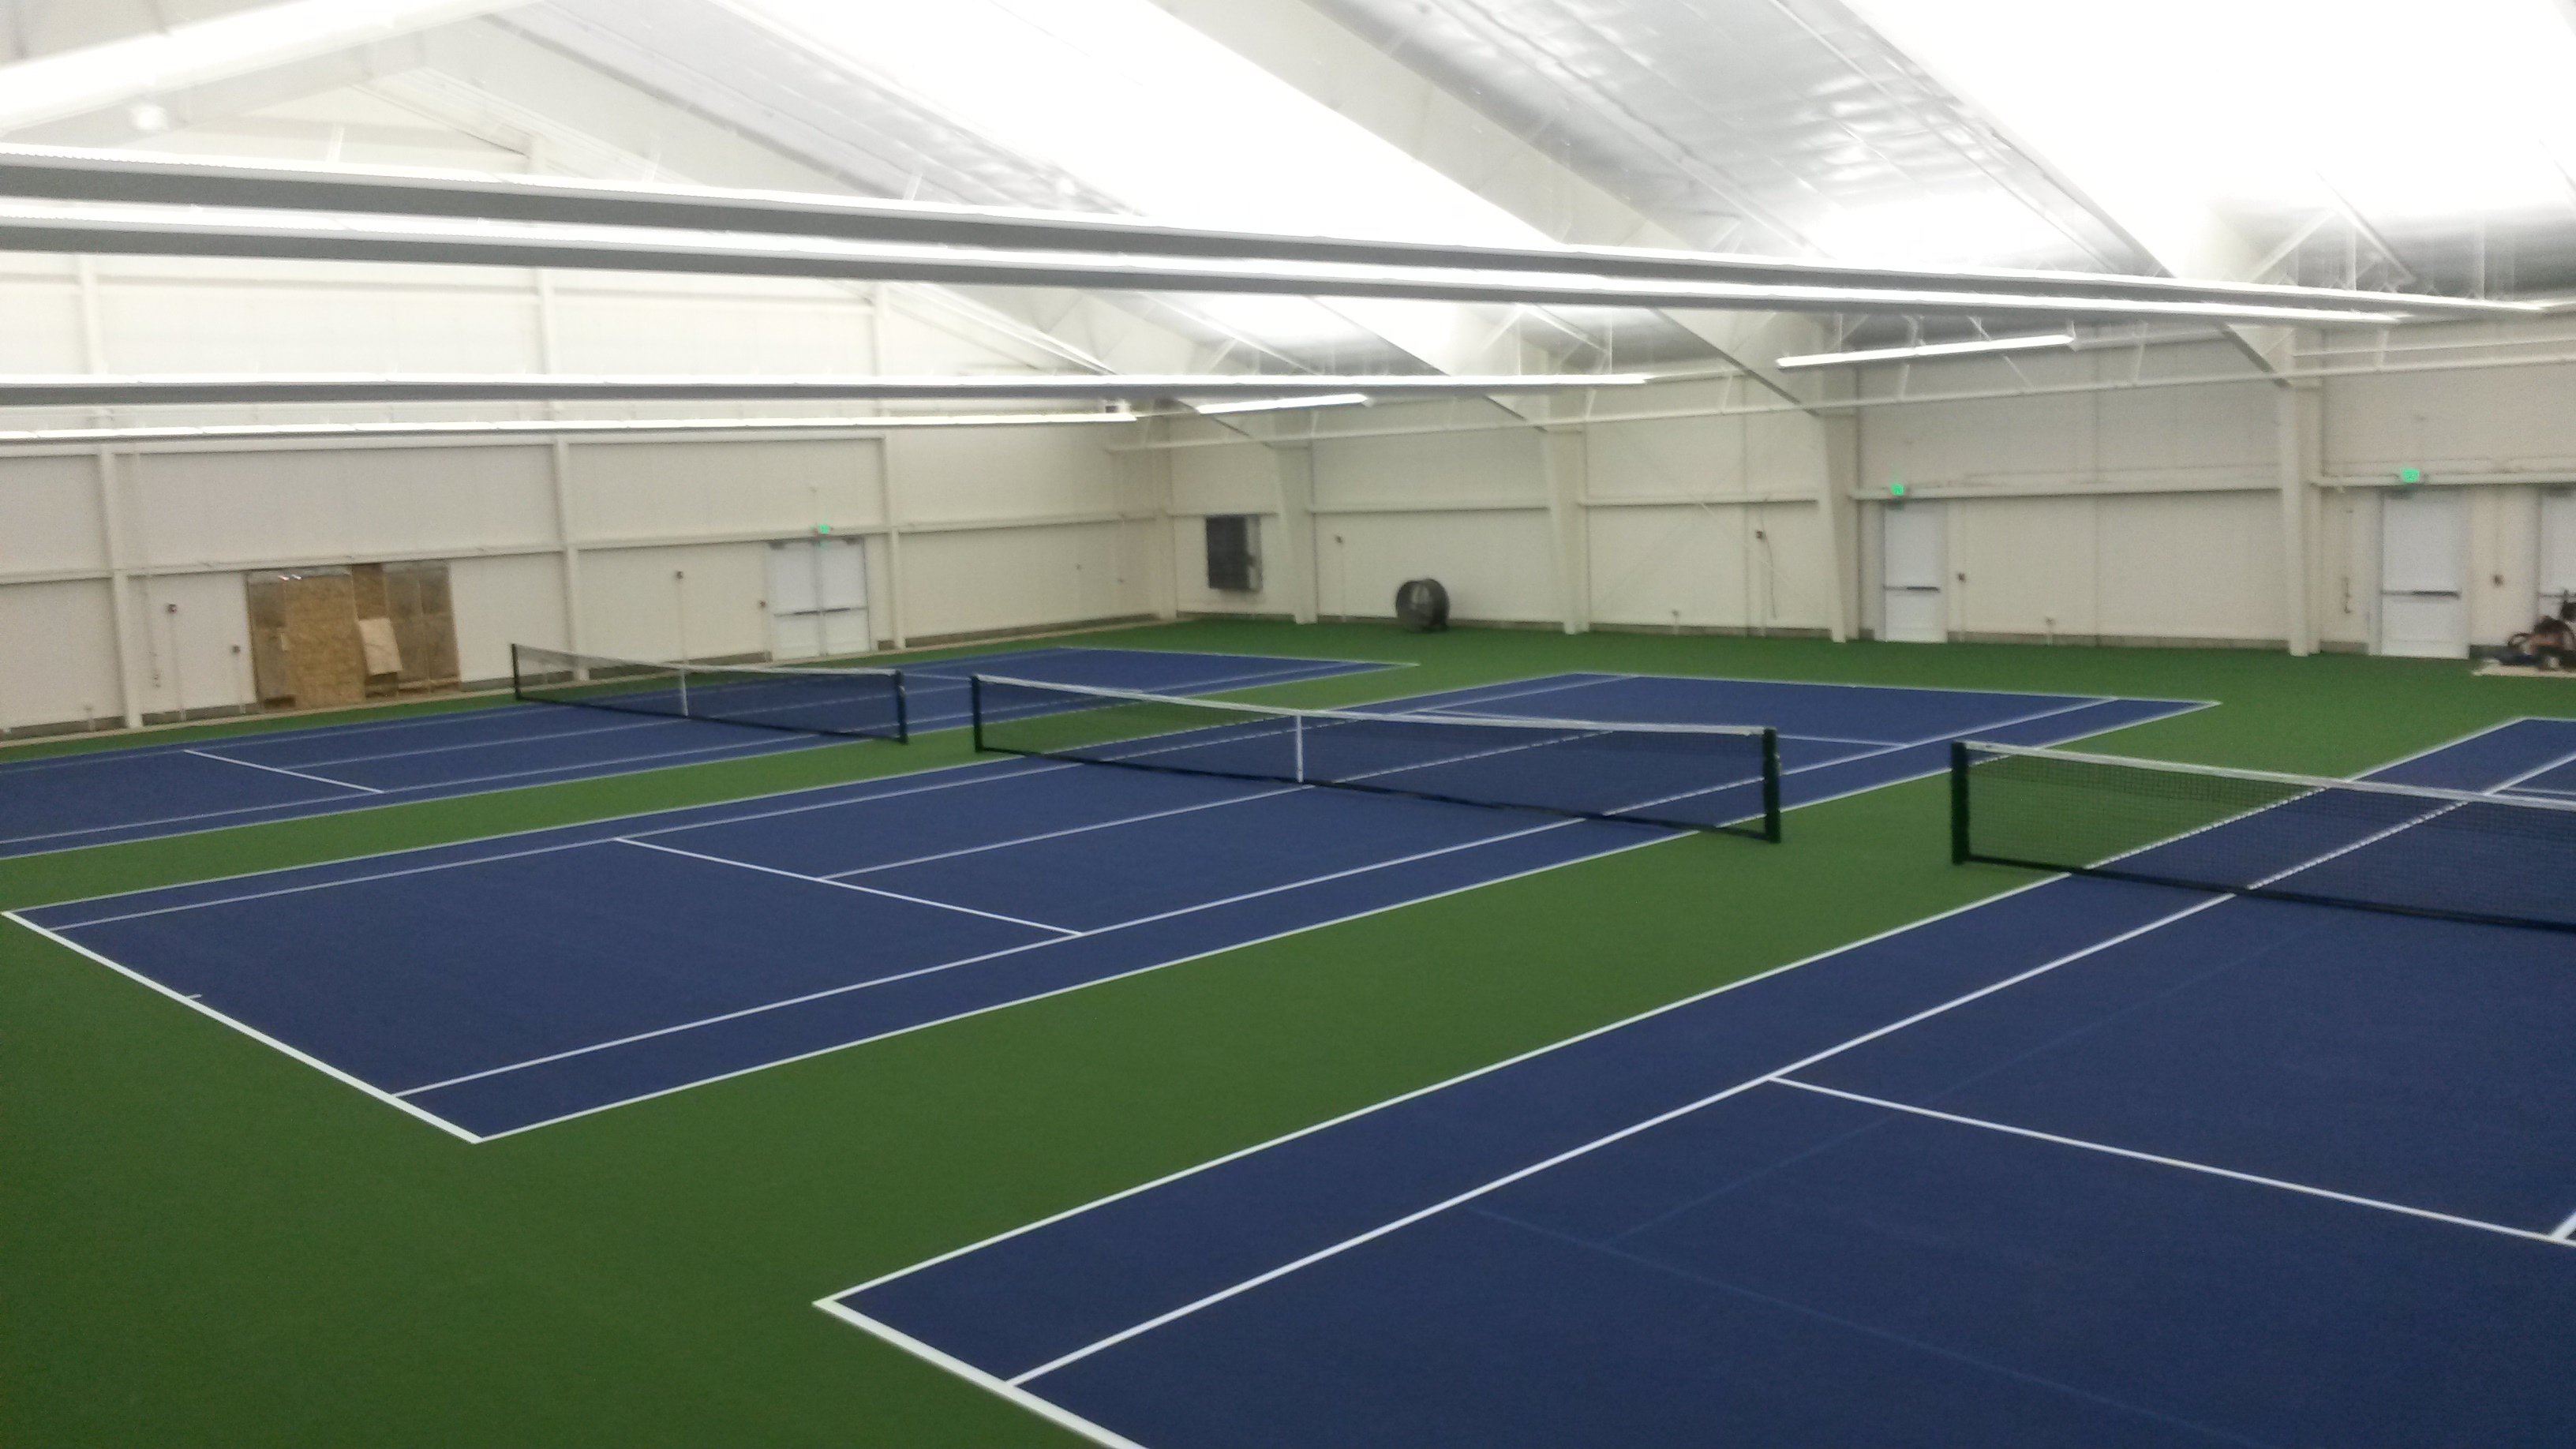 ThinkLite relights the courts at the Tennis Hall of Fame